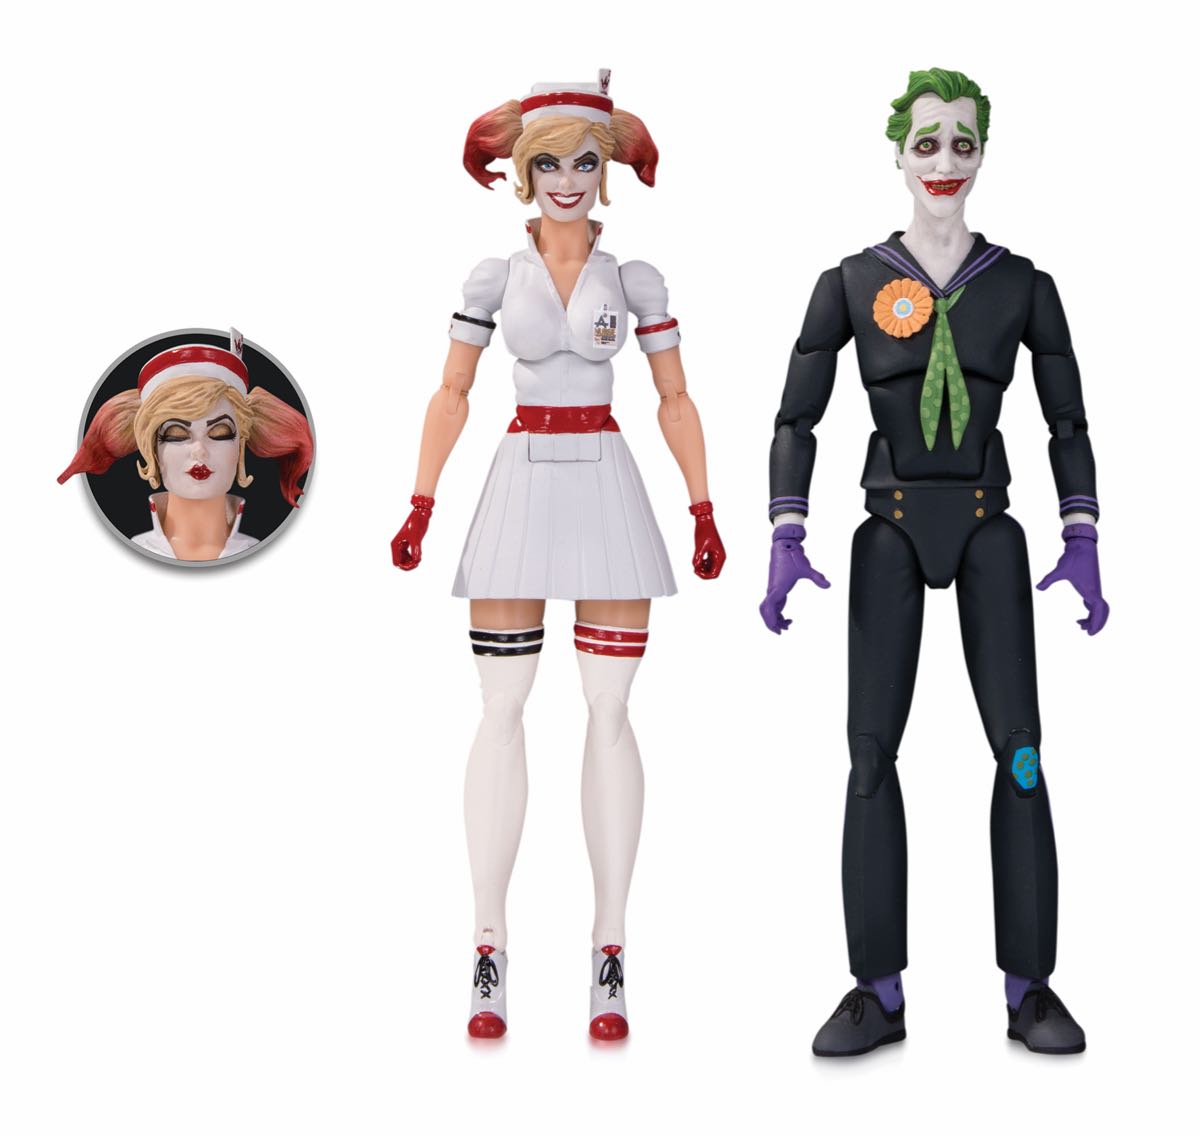 DC DESIGNER SERIES: ANT LUCIA BOMBSHELLS NURSE HARLEY AND THE JOKER ACTION FIGURE TWO-PACK